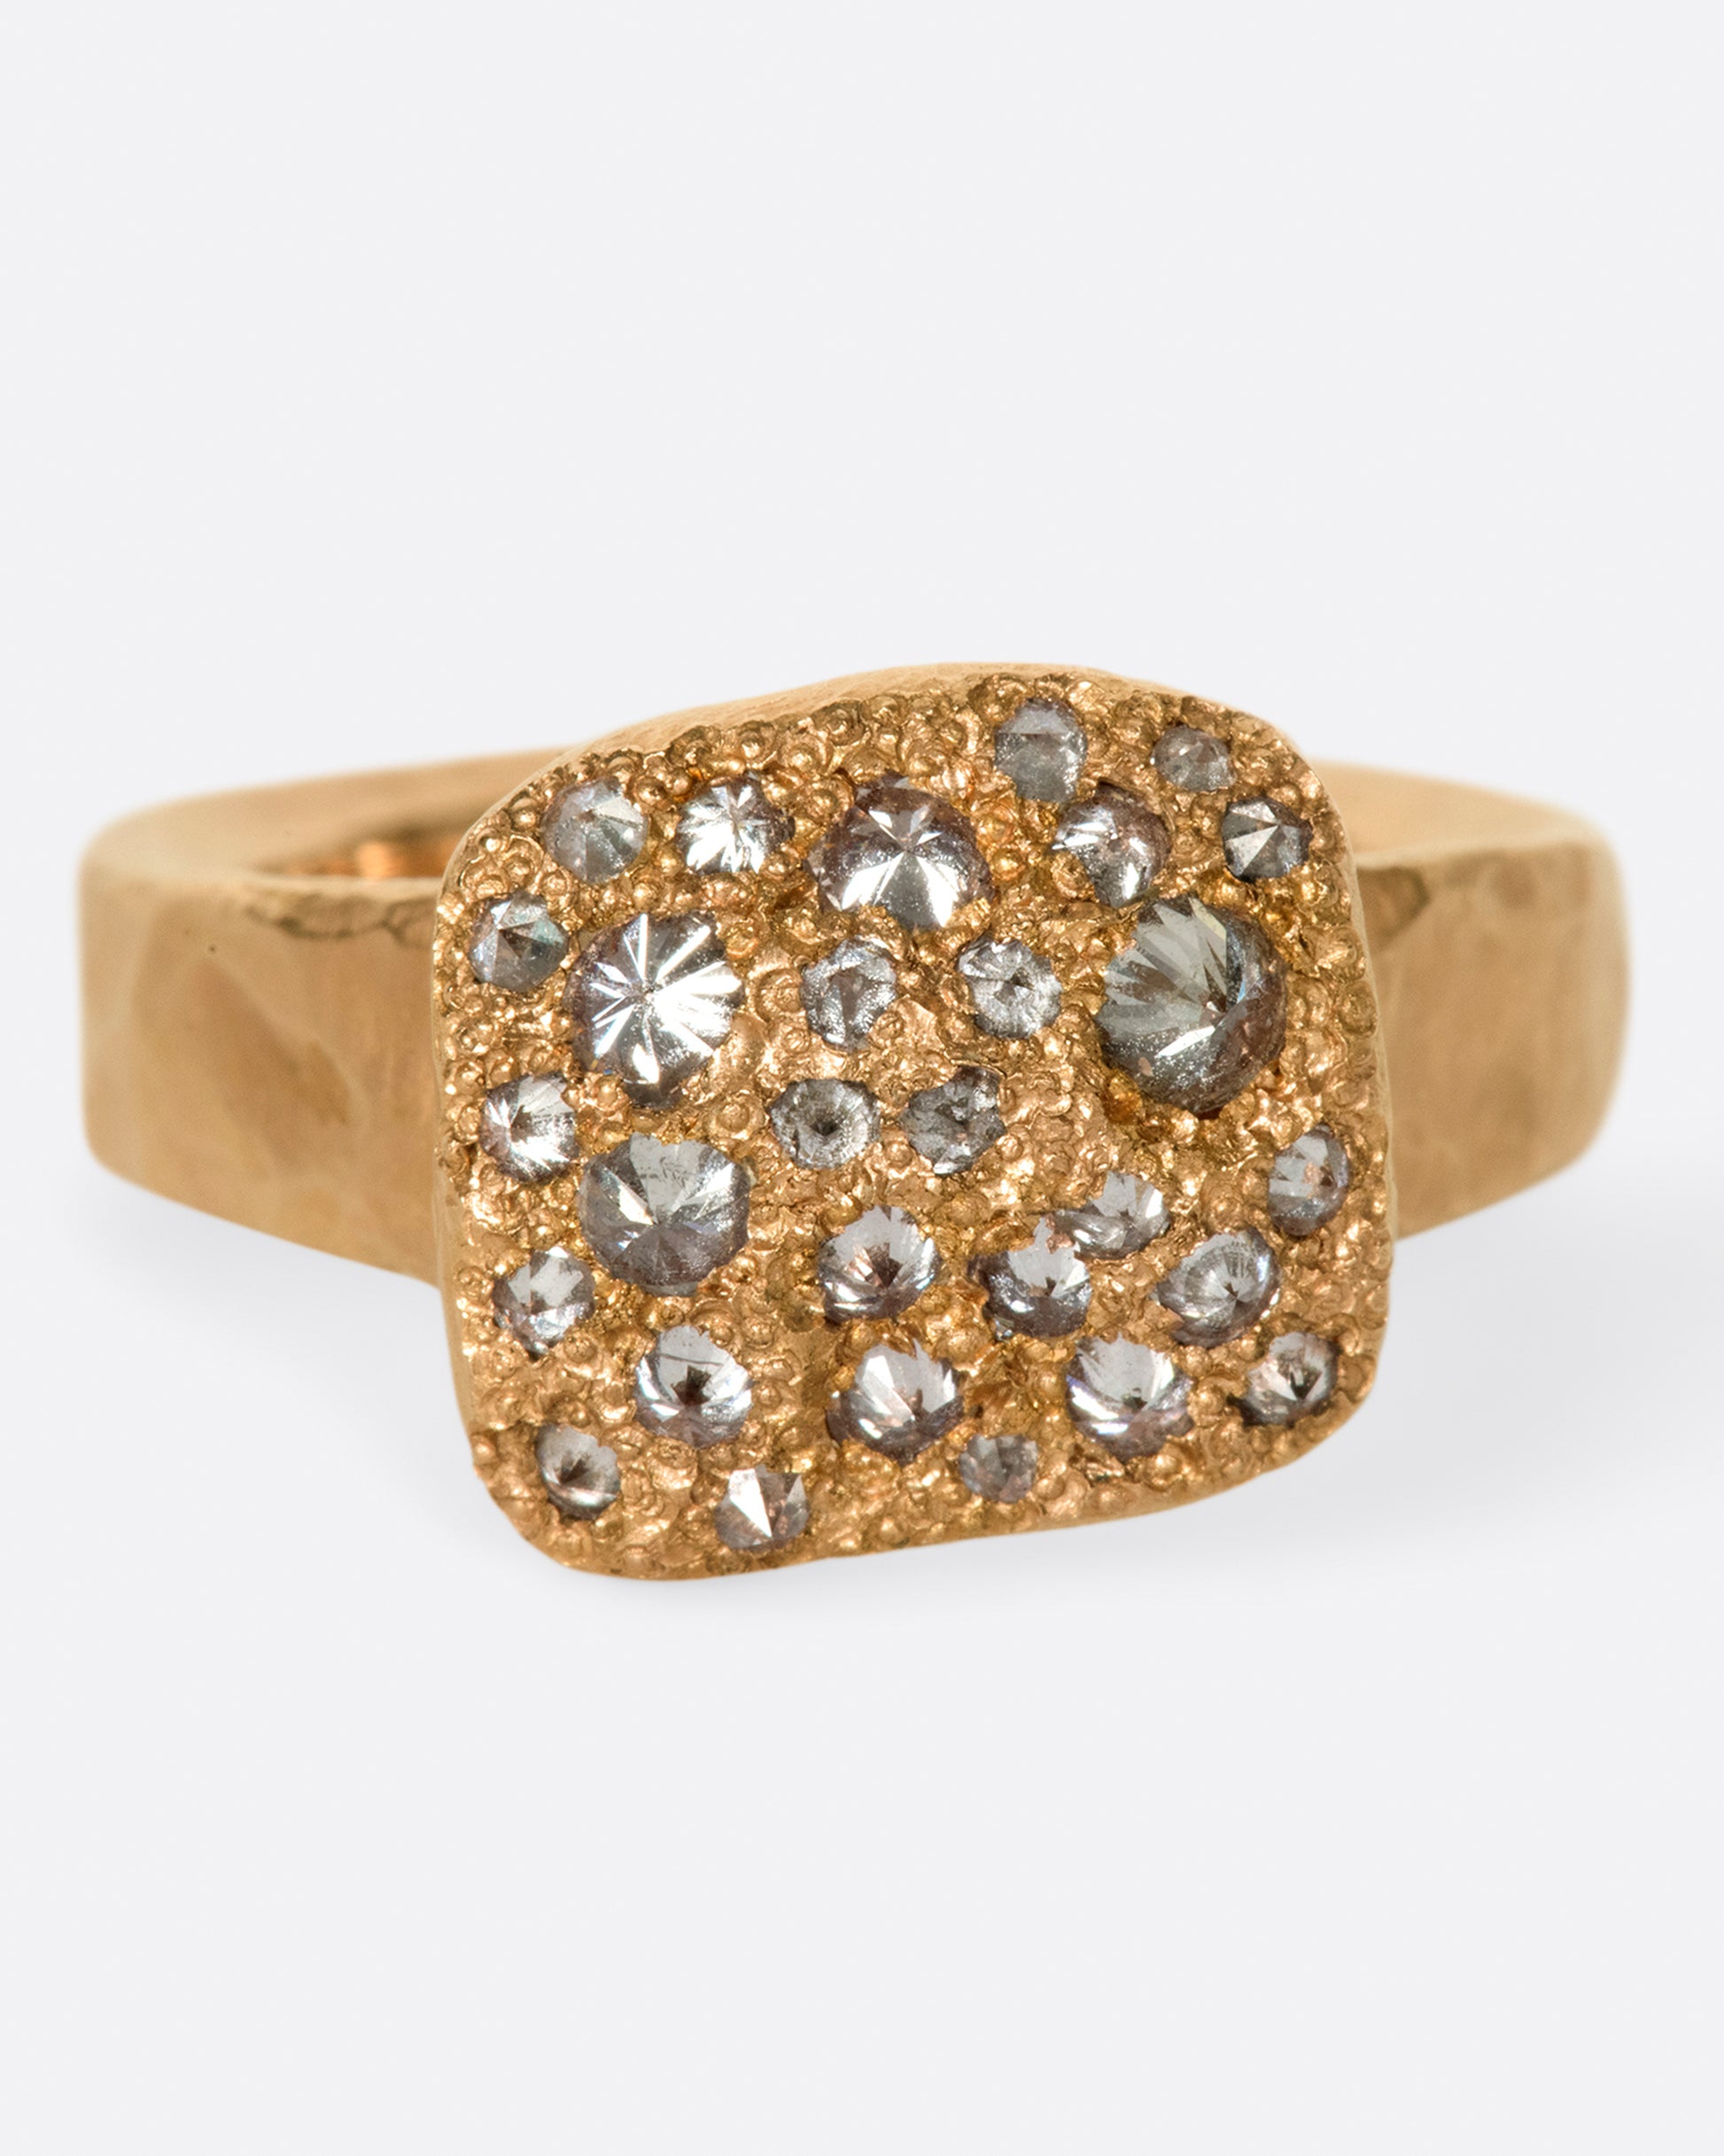 A hammered, hefty rose gold ring with inverted diamonds scattered across its rectangular face.